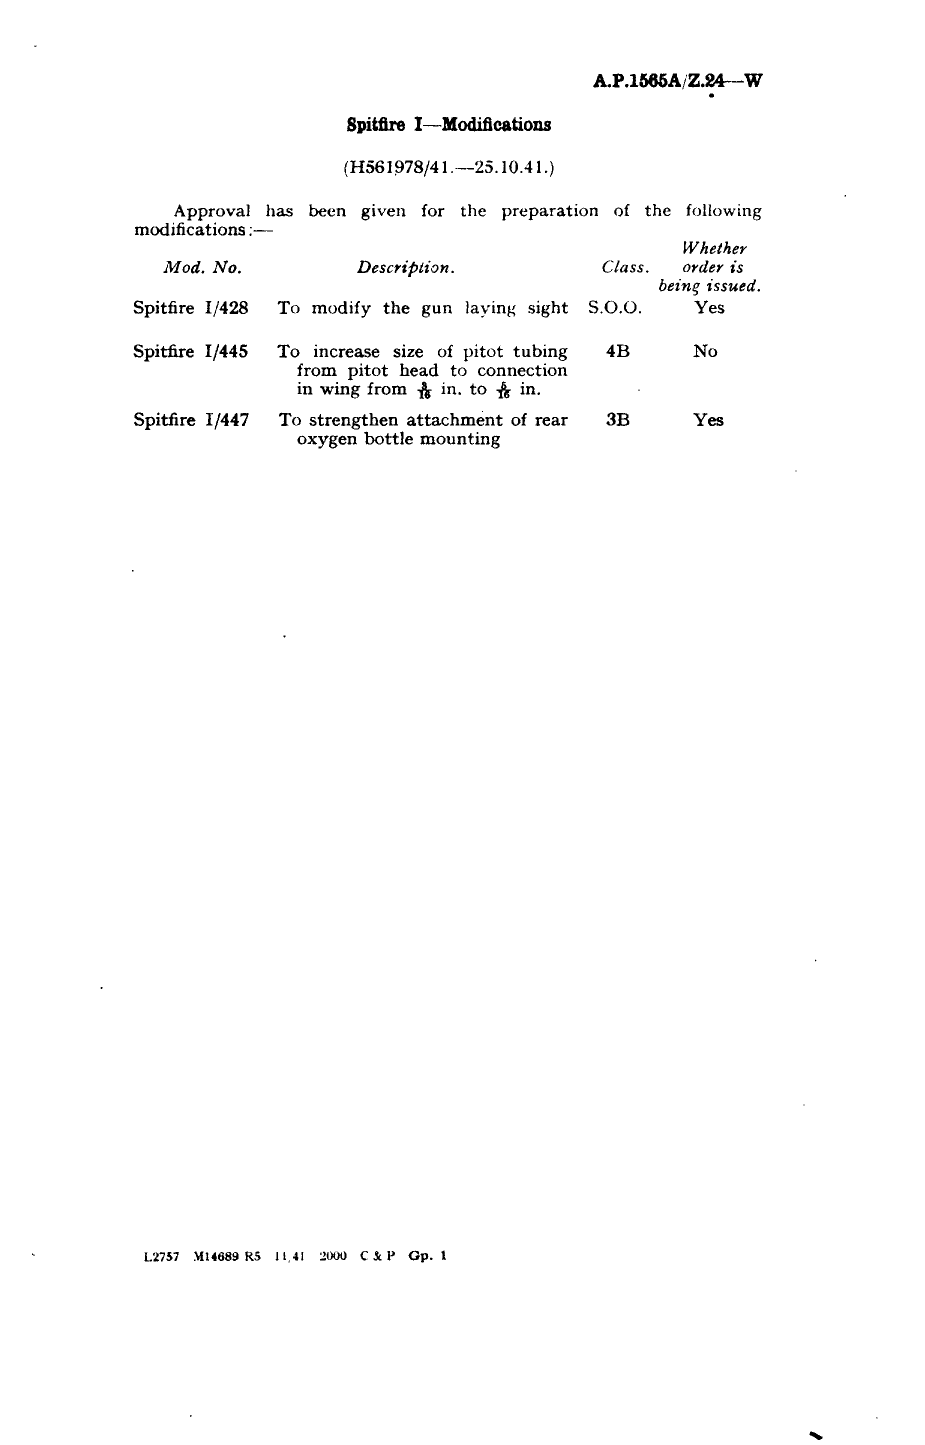 Sample page 1 from AirCorps Library document: Spitfire I Modifications 428, 445 and 447